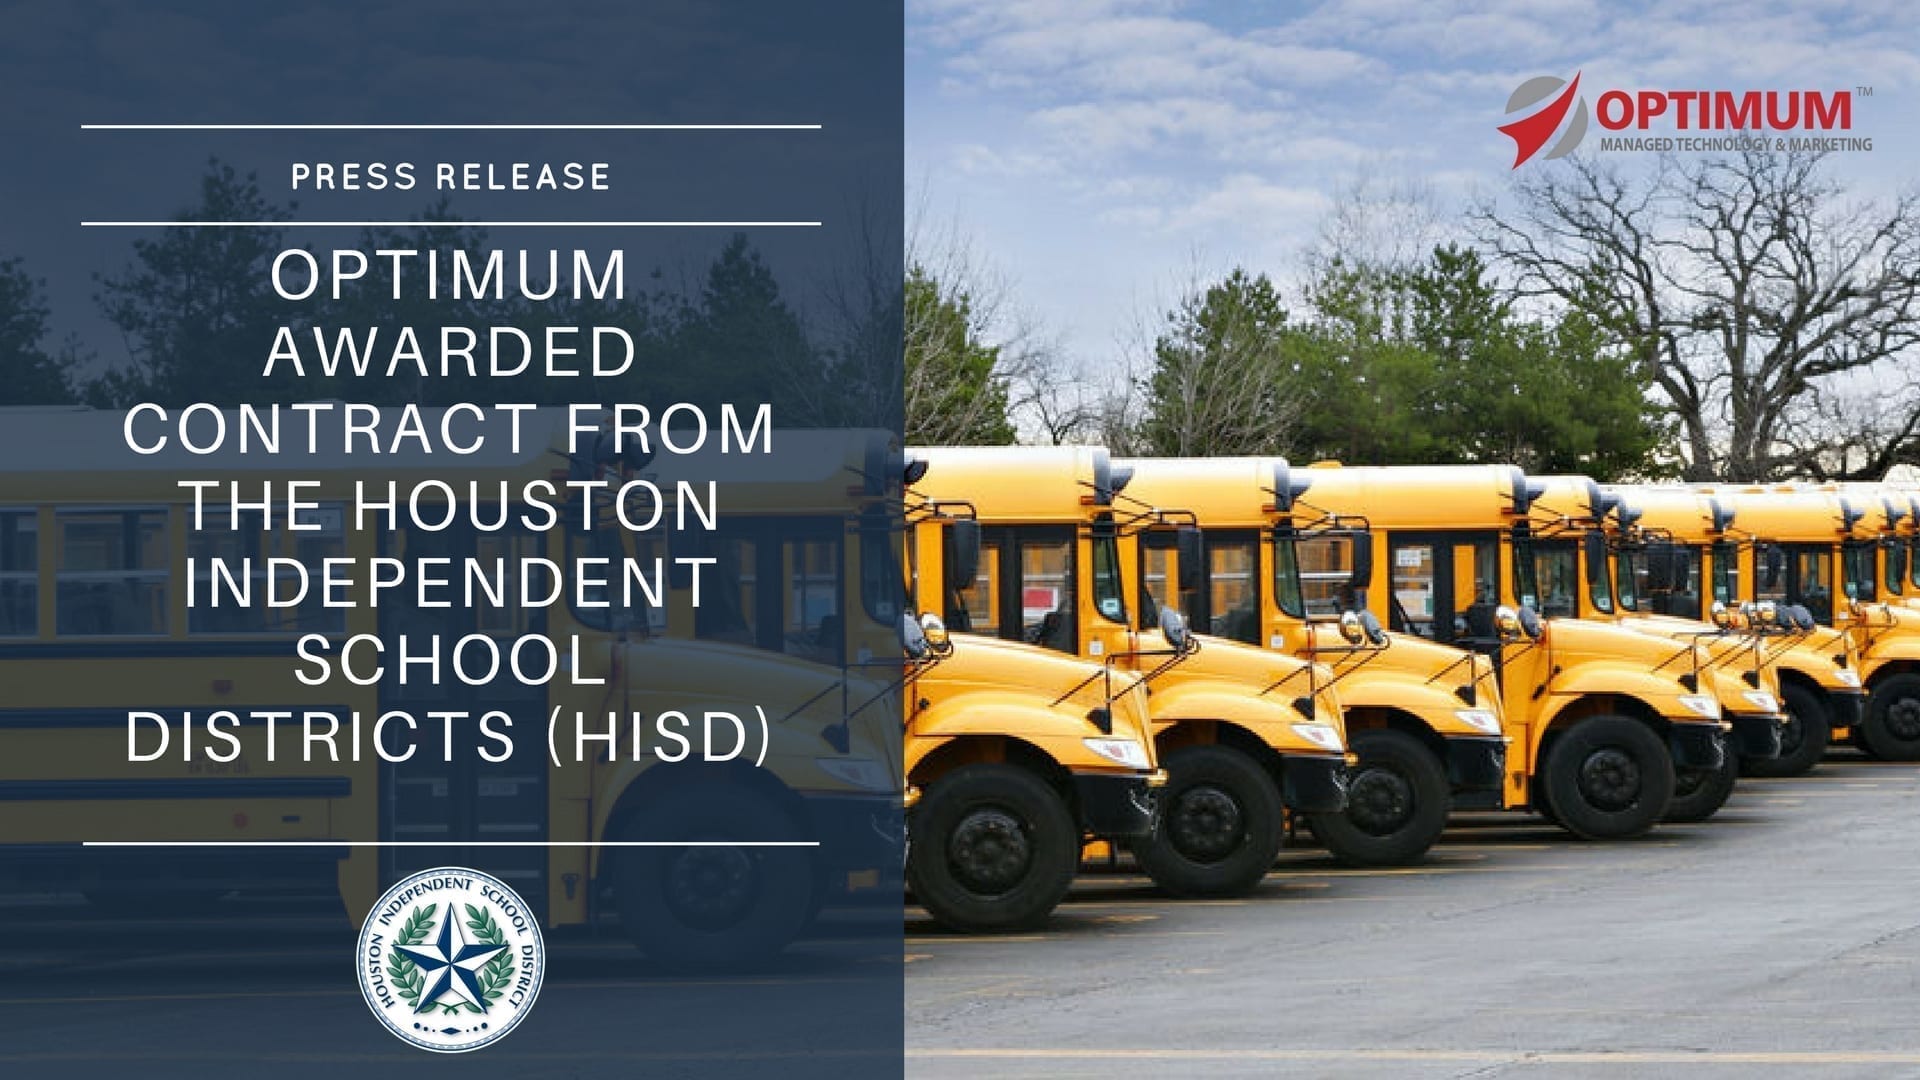 Optimum awarded contract with HISD